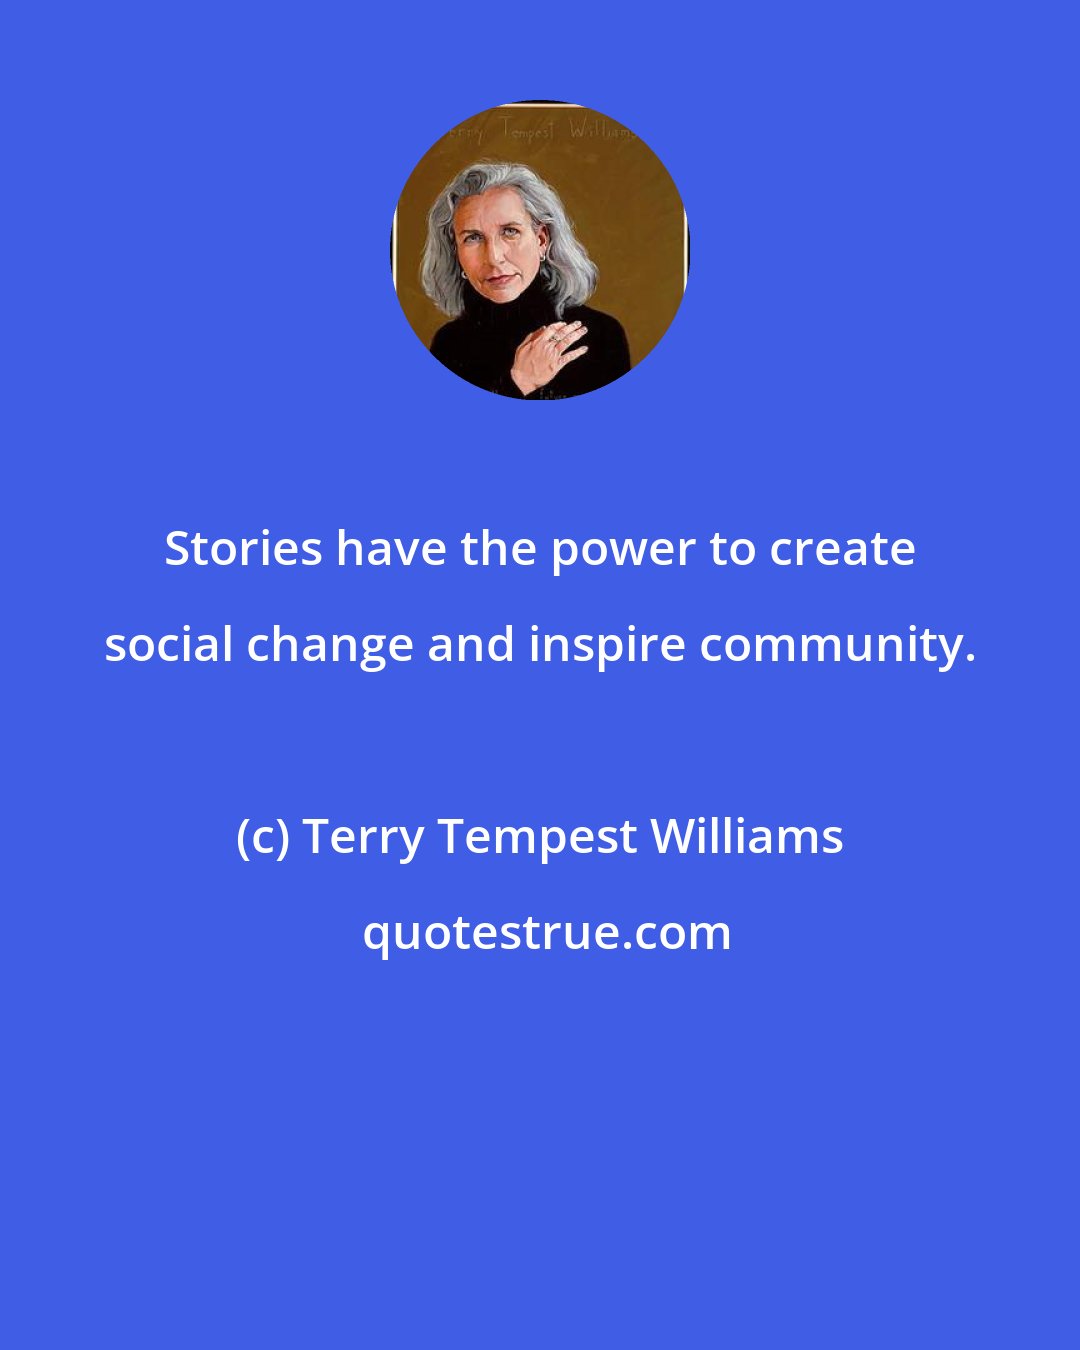 Terry Tempest Williams: Stories have the power to create social change and inspire community.